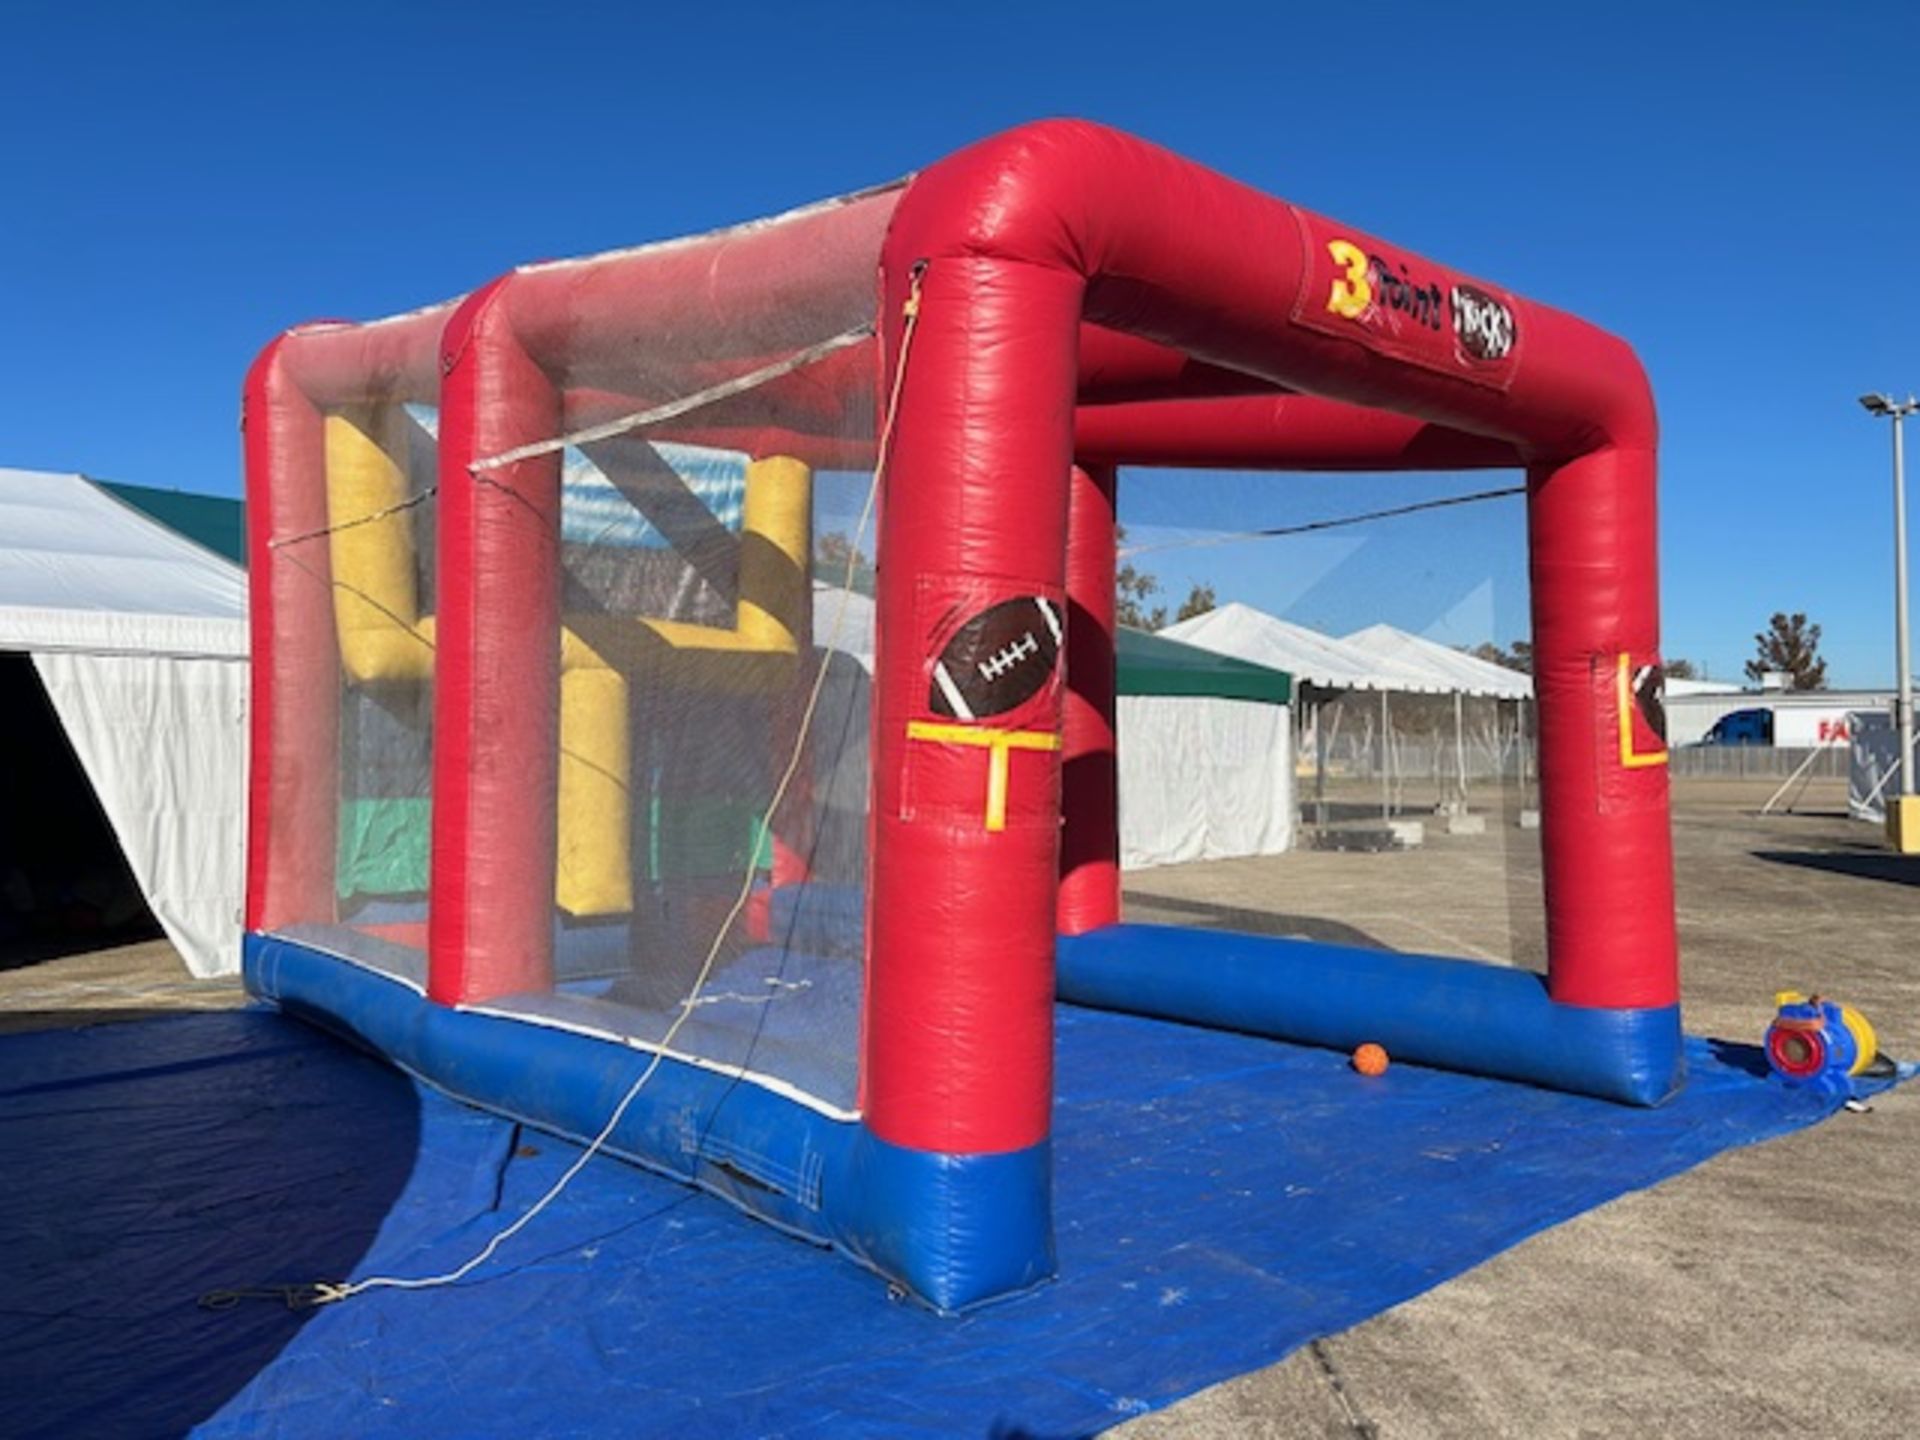 17'x25' 3 Point Kick Inflatable Field Goal, requires 2 blowers - Image 2 of 3